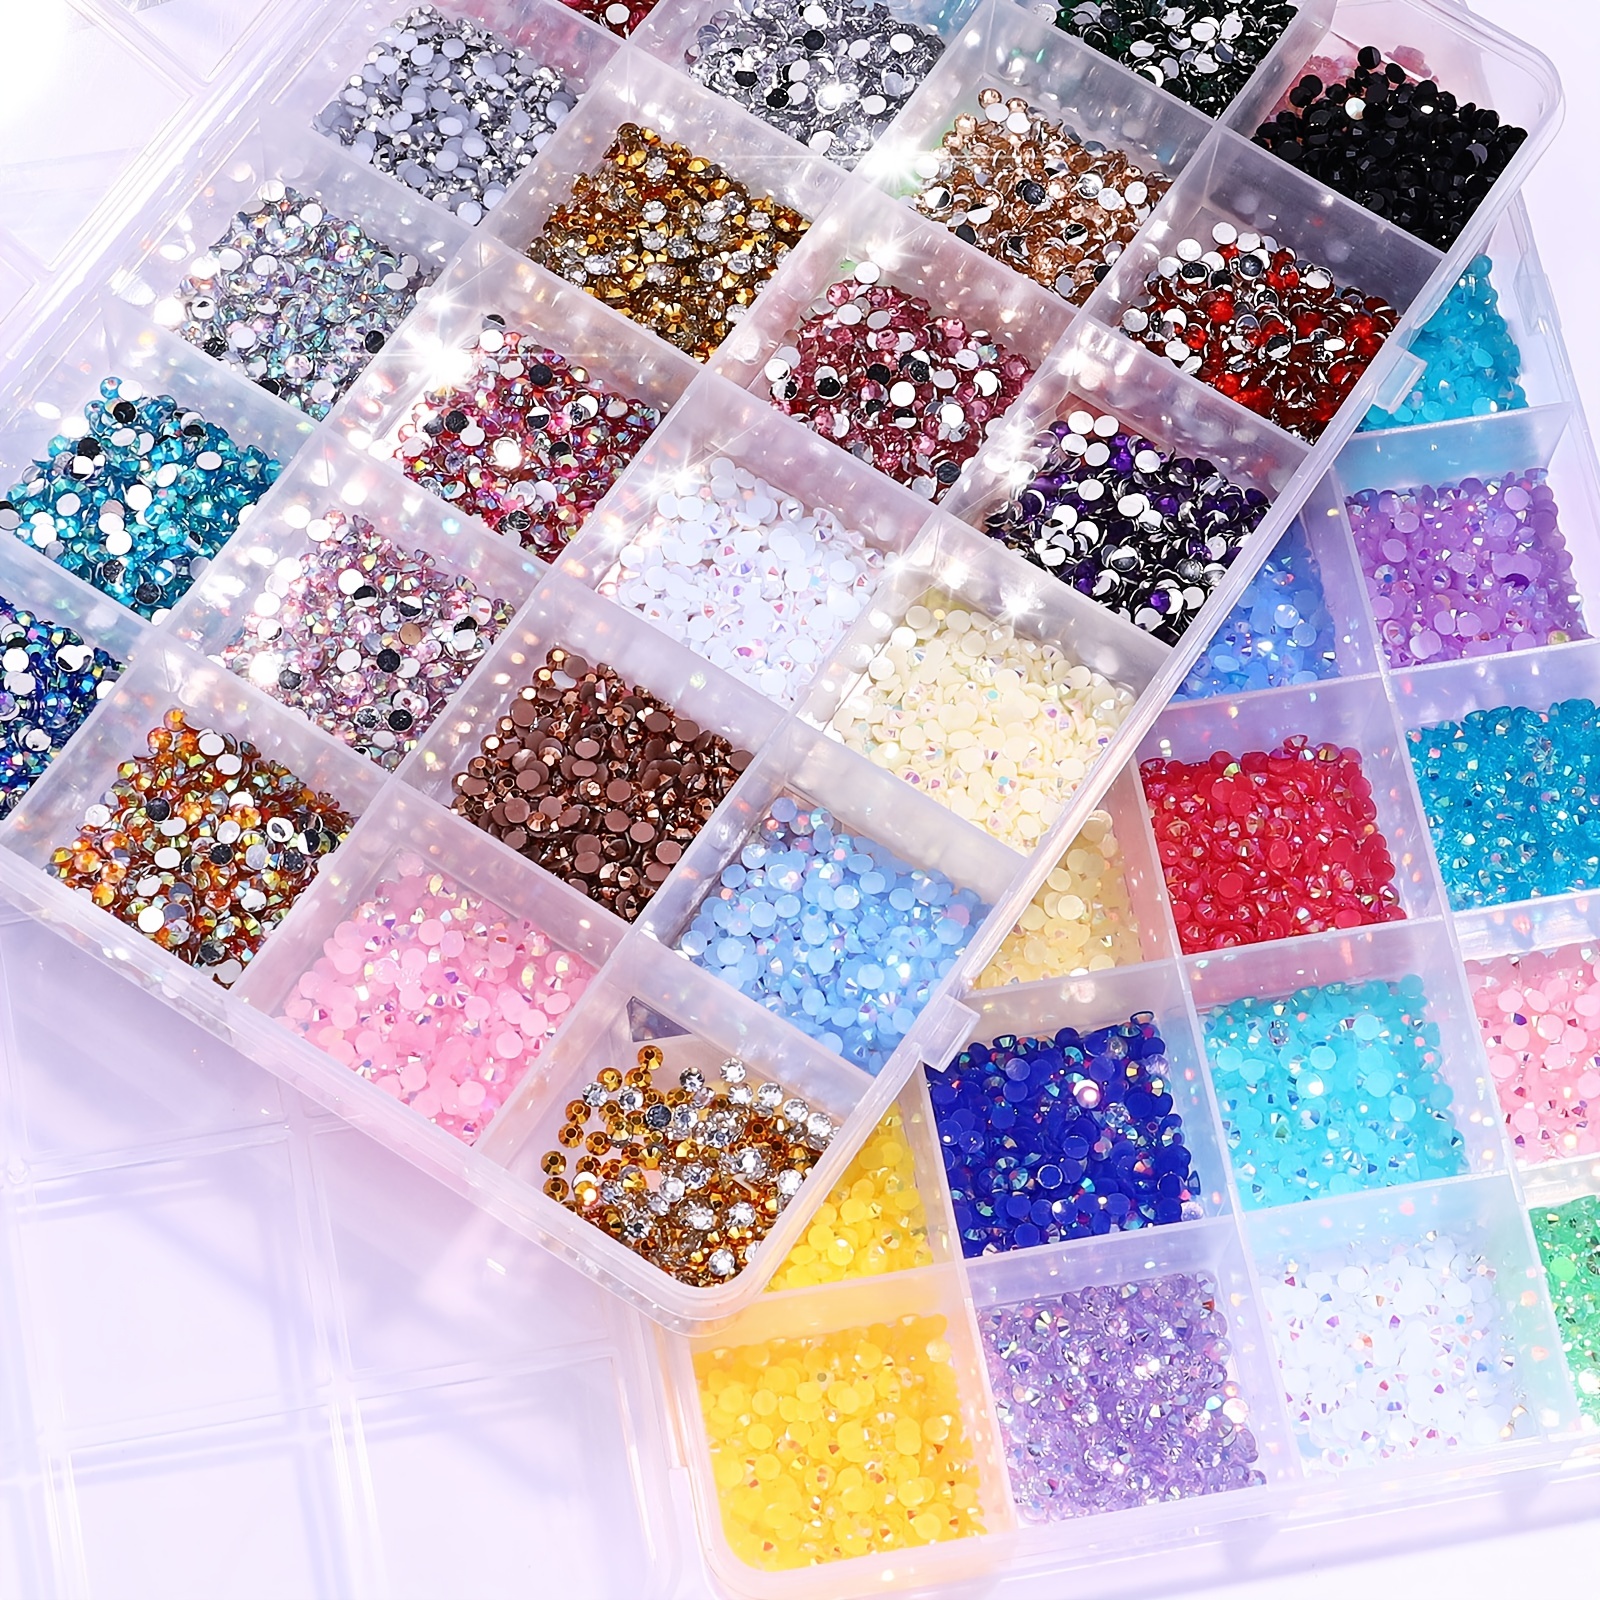 3mm Clear AB Crystal Rhinestones Set Round Resin Flatback Colorful Glitter  Gems Nail Accessories DIY 3D Nail Art Decorations